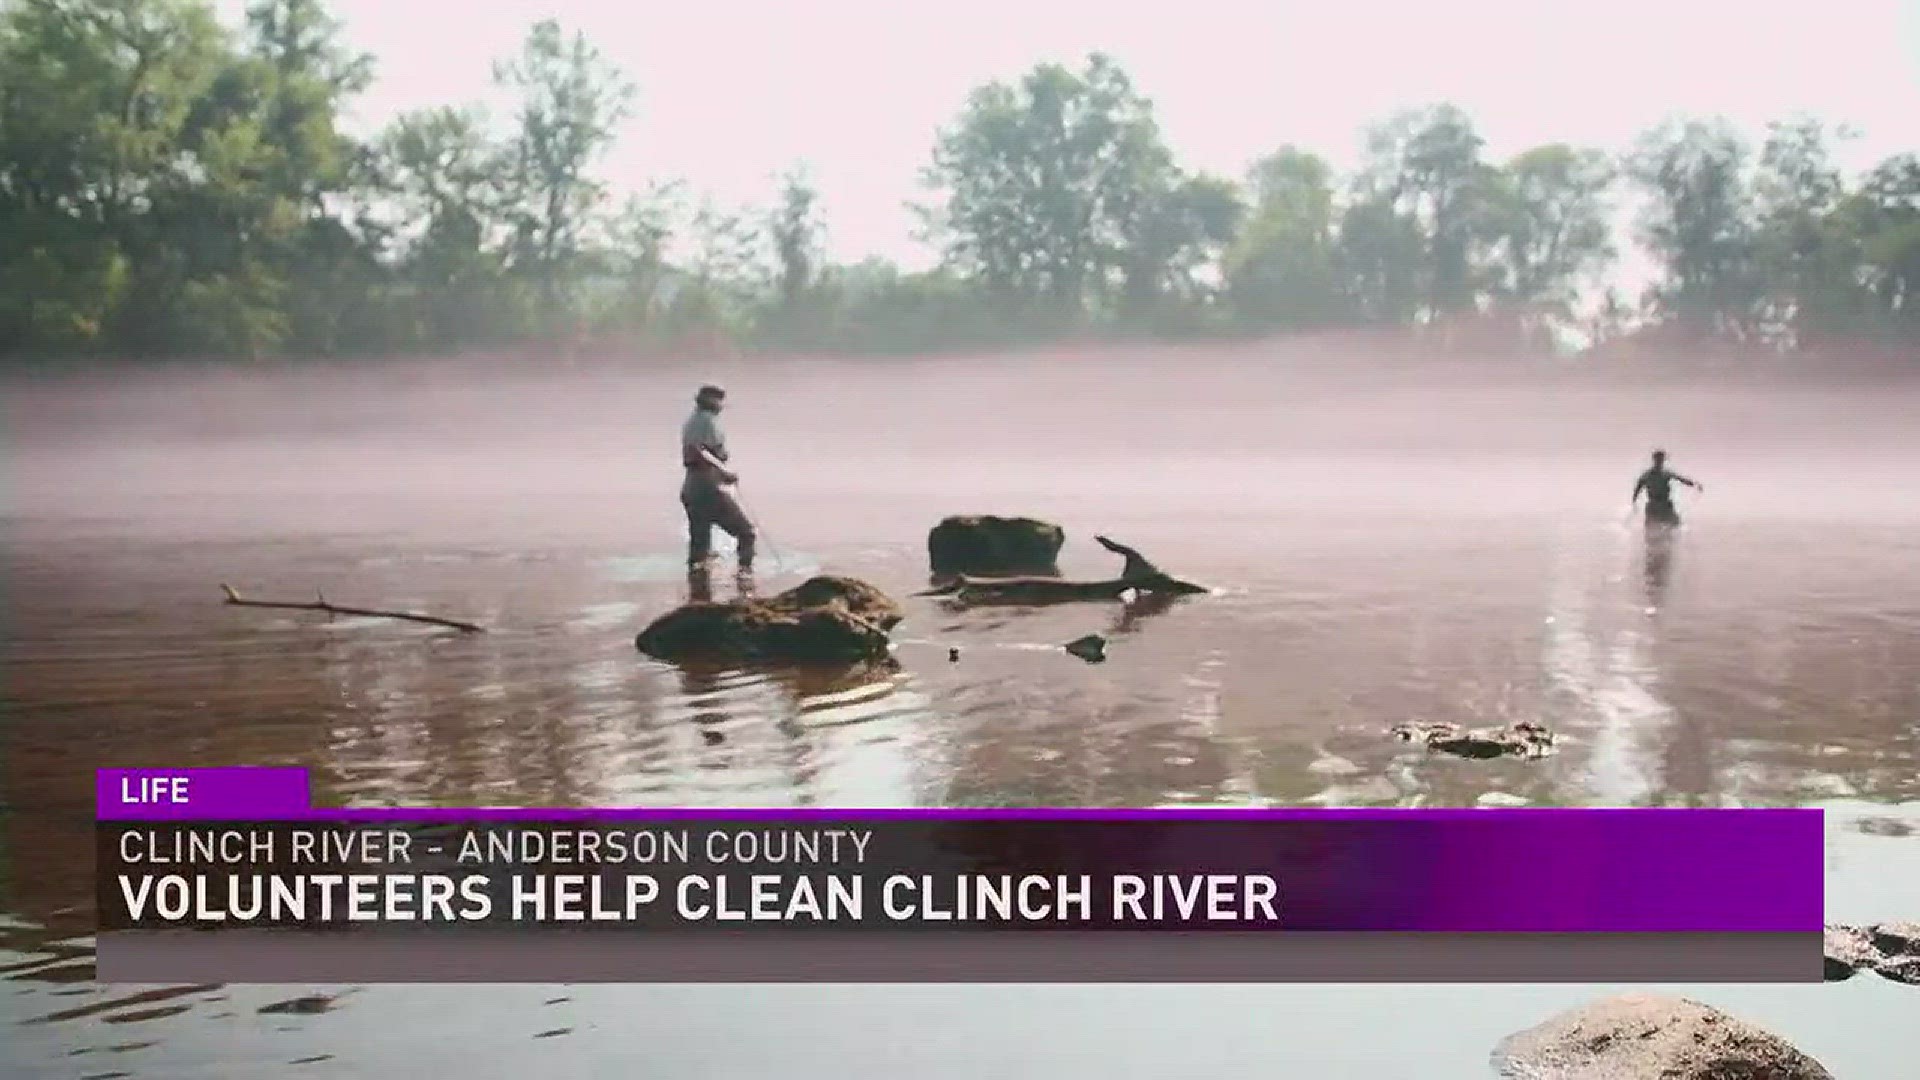 Volunteers cleaned up the waters and shore of the Clinch River early Saturday morning.